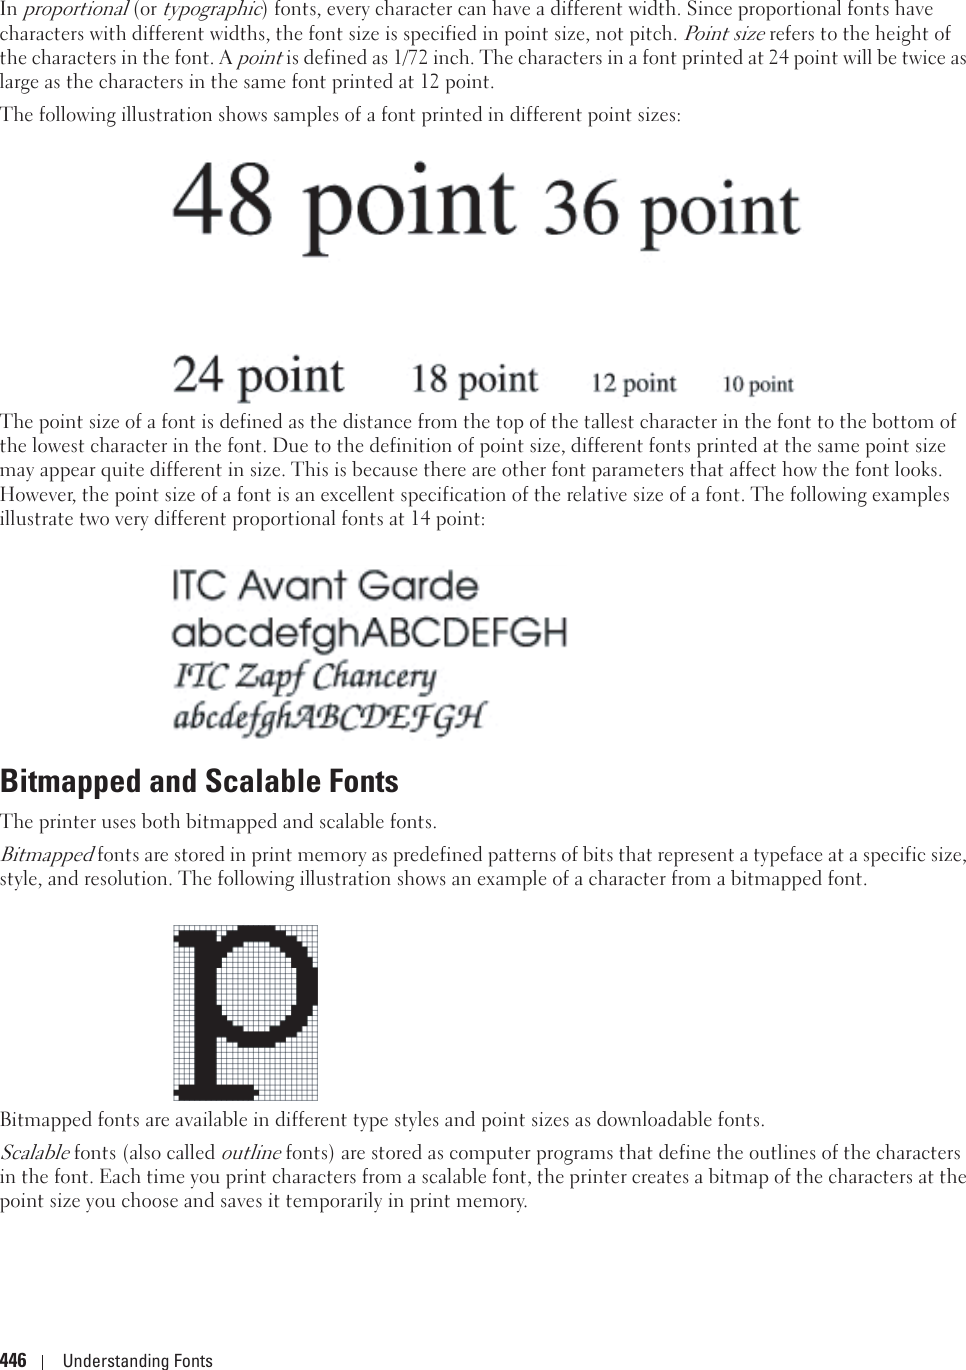 446 Understanding FontsIn proportional (or typographic) fonts, every character can have a different width. Since proportional fonts have characters with different widths, the font size is specified in point size, not pitch. Point size refers to the height of the characters in the font. A point is defined as 1/72 inch. The characters in a font printed at 24 point will be twice as large as the characters in the same font printed at 12 point.The following illustration shows samples of a font printed in different point sizes:The point size of a font is defined as the distance from the top of the tallest character in the font to the bottom of the lowest character in the font. Due to the definition of point size, different fonts printed at the same point size may appear quite different in size. This is because there are other font parameters that affect how the font looks. However, the point size of a font is an excellent specification of the relative size of a font. The following examples illustrate two very different proportional fonts at 14 point: Bitmapped and Scalable FontsThe printer uses both bitmapped and scalable fonts.Bitmapped fonts are stored in print memory as predefined patterns of bits that represent a typeface at a specific size, style, and resolution. The following illustration shows an example of a character from a bitmapped font.Bitmapped fonts are available in different type styles and point sizes as downloadable fonts.Scalable fonts (also called outline fonts) are stored as computer programs that define the outlines of the characters in the font. Each time you print characters from a scalable font, the printer creates a bitmap of the characters at the point size you choose and saves it temporarily in print memory.